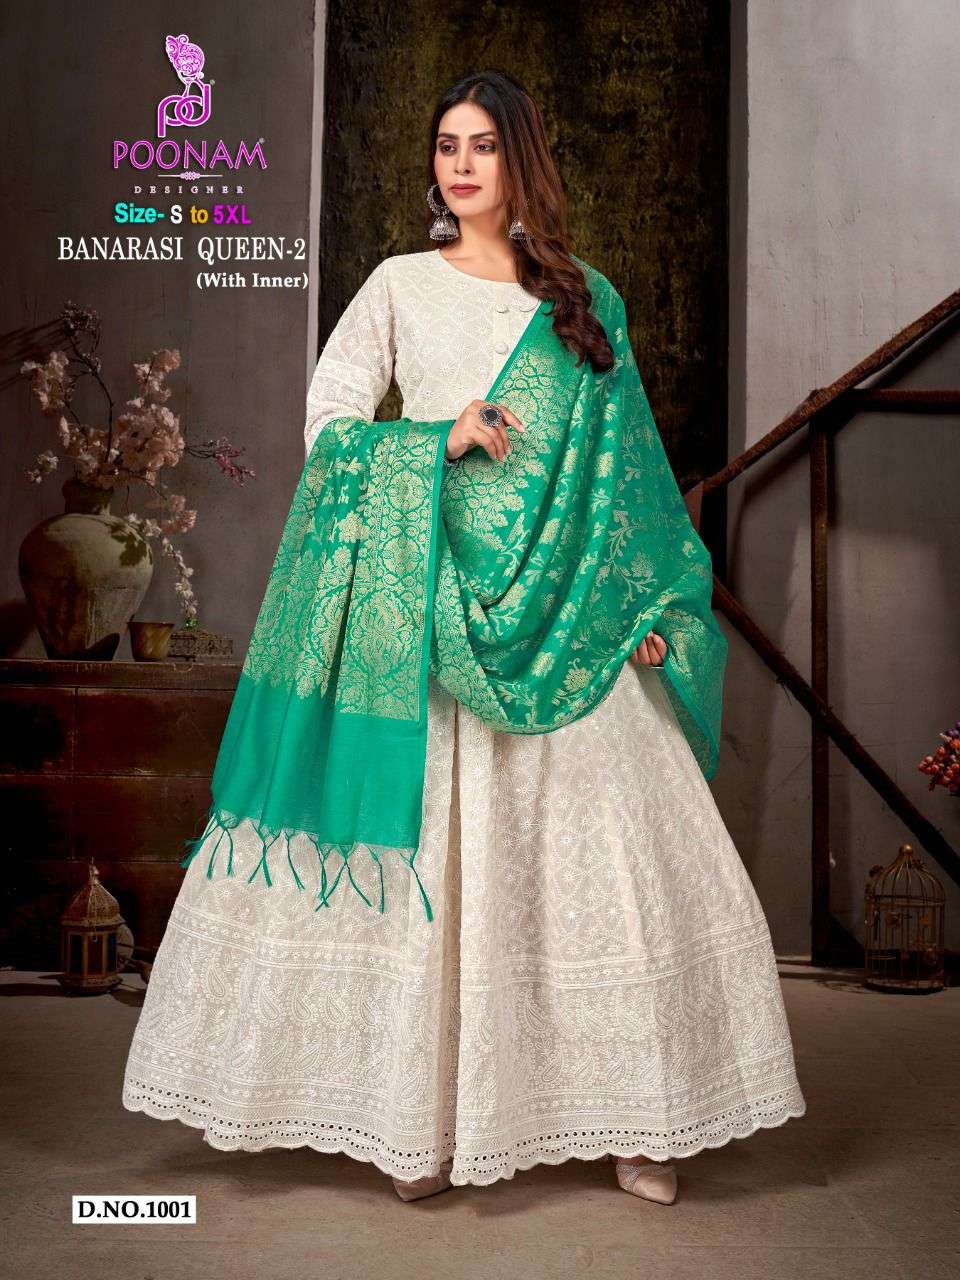 poonam banarasi queen vol 2 chikan work white gown with dupatta exports best shipping rate 